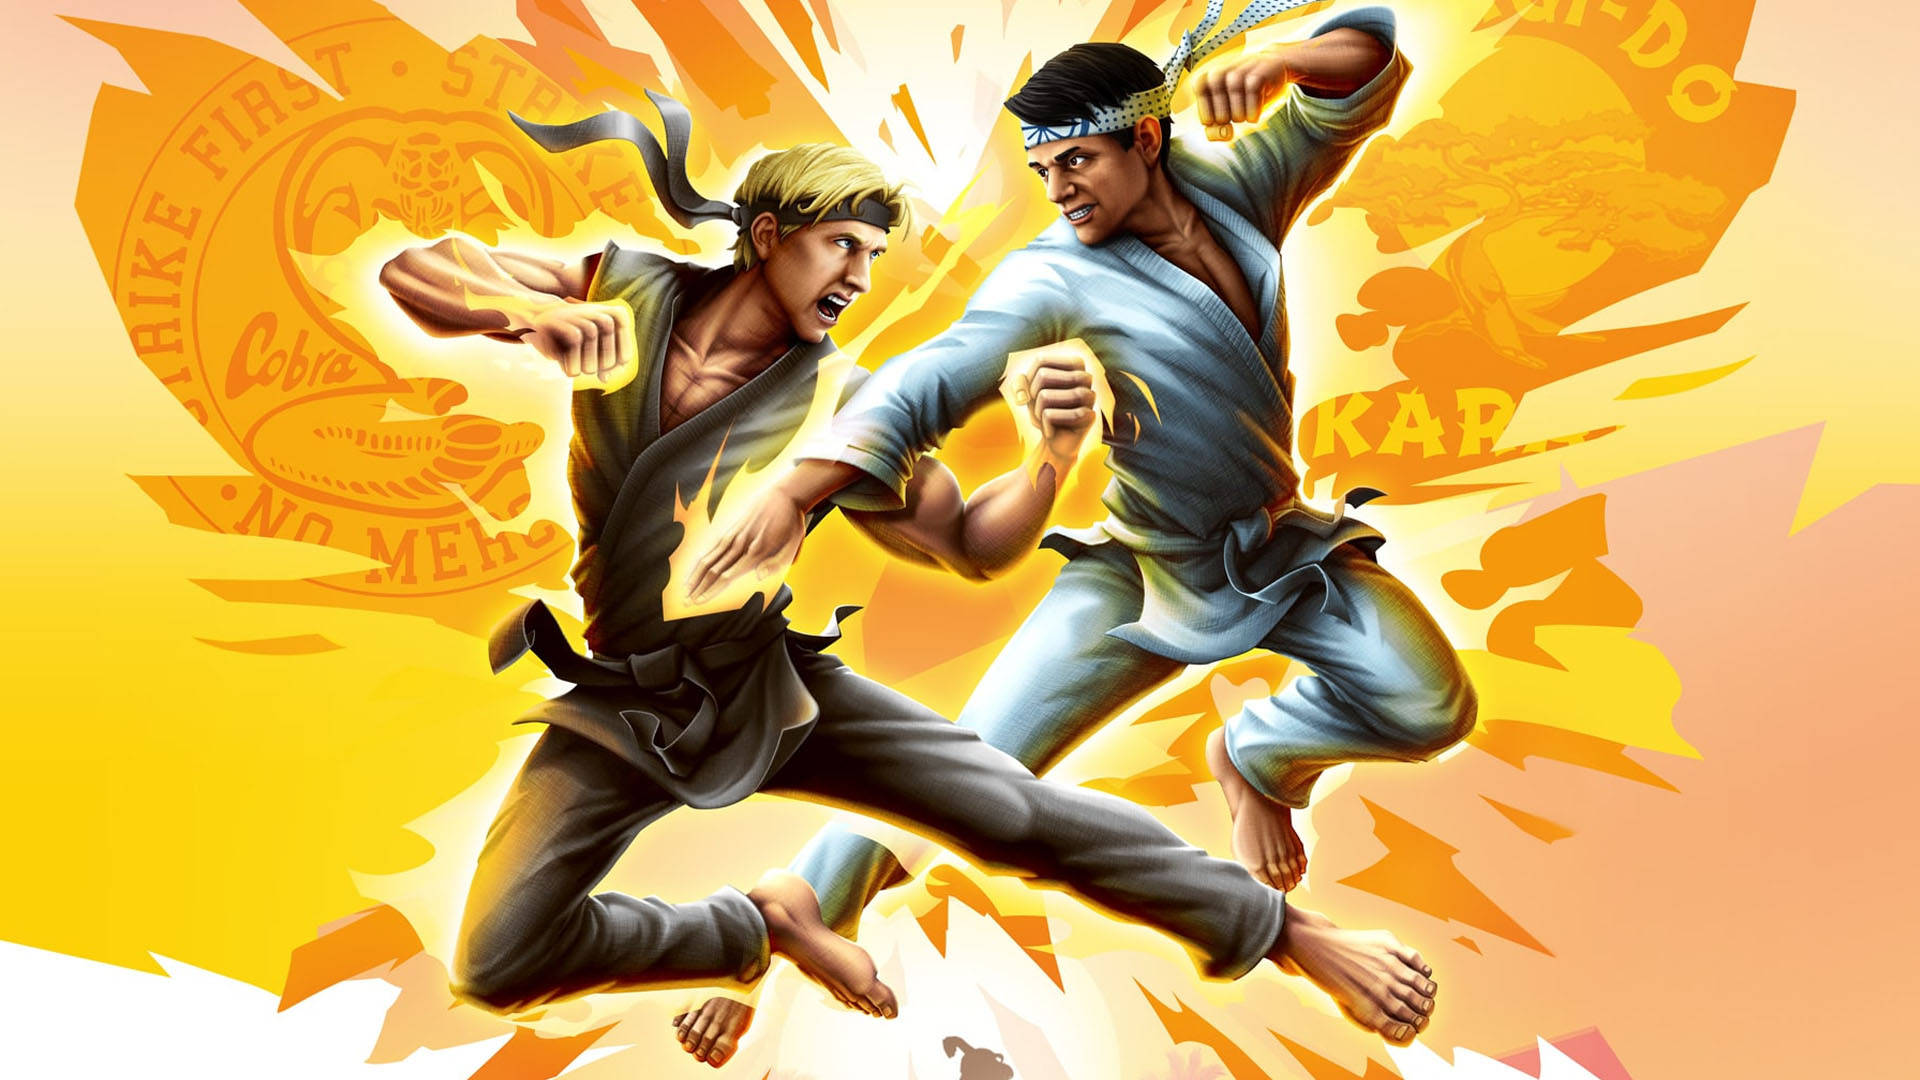 Two Karate Fighters Engaged in a High-Stakes Battle Wallpaper